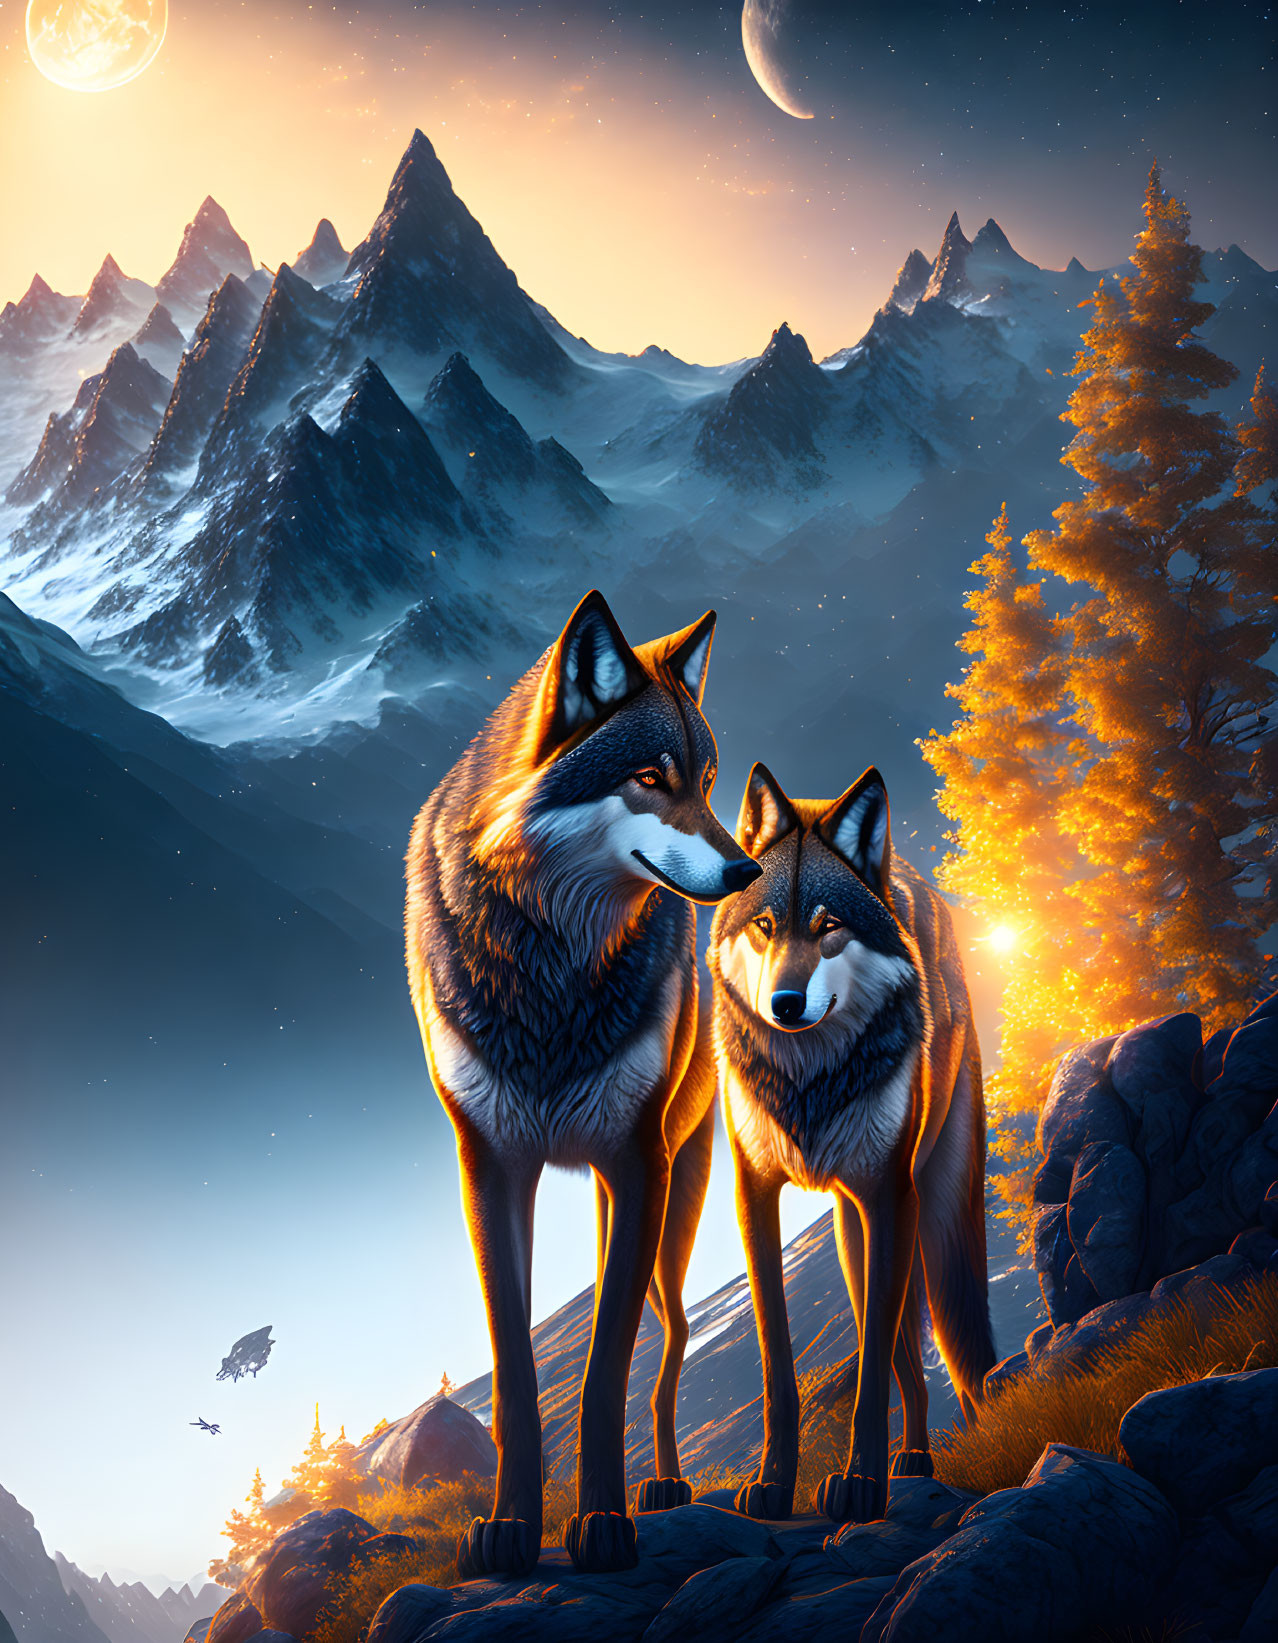 Two Wolves on Rocky Outcrop at Dusk with Mountain Backdrop